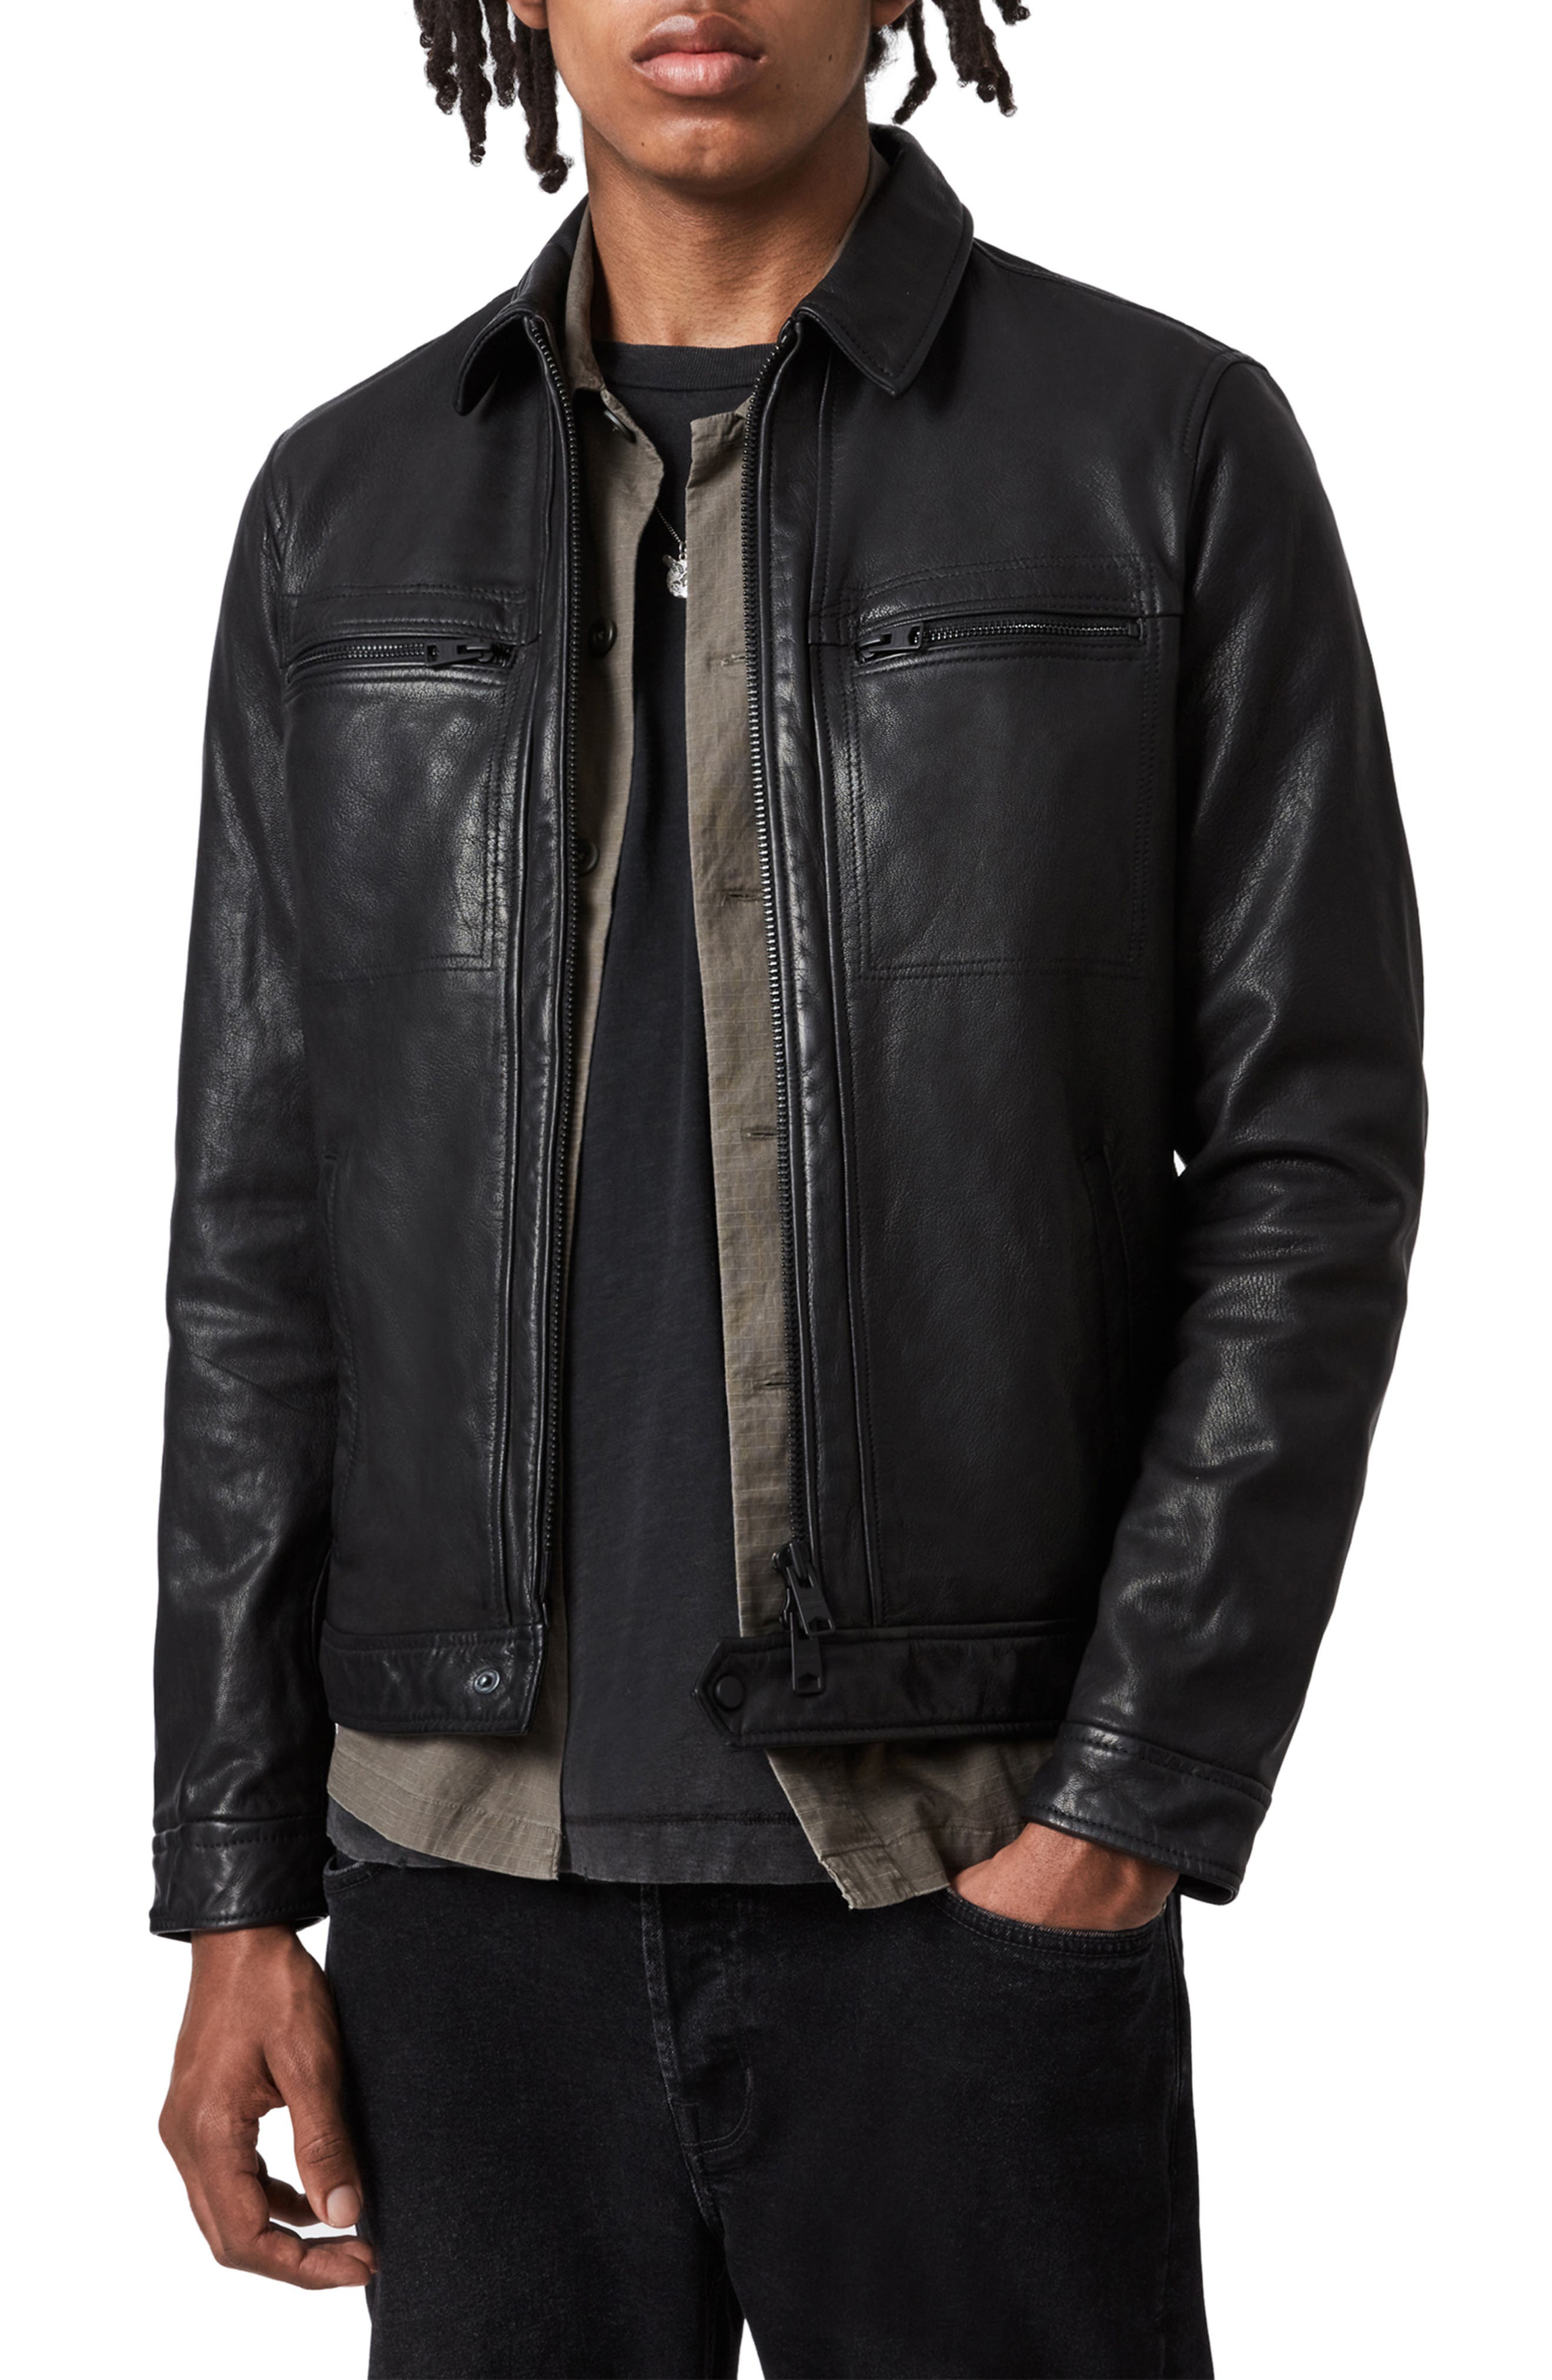 iLXHD Faux Leather Jackets for Men PU Black Brown Leather Jacket Coats Outwear